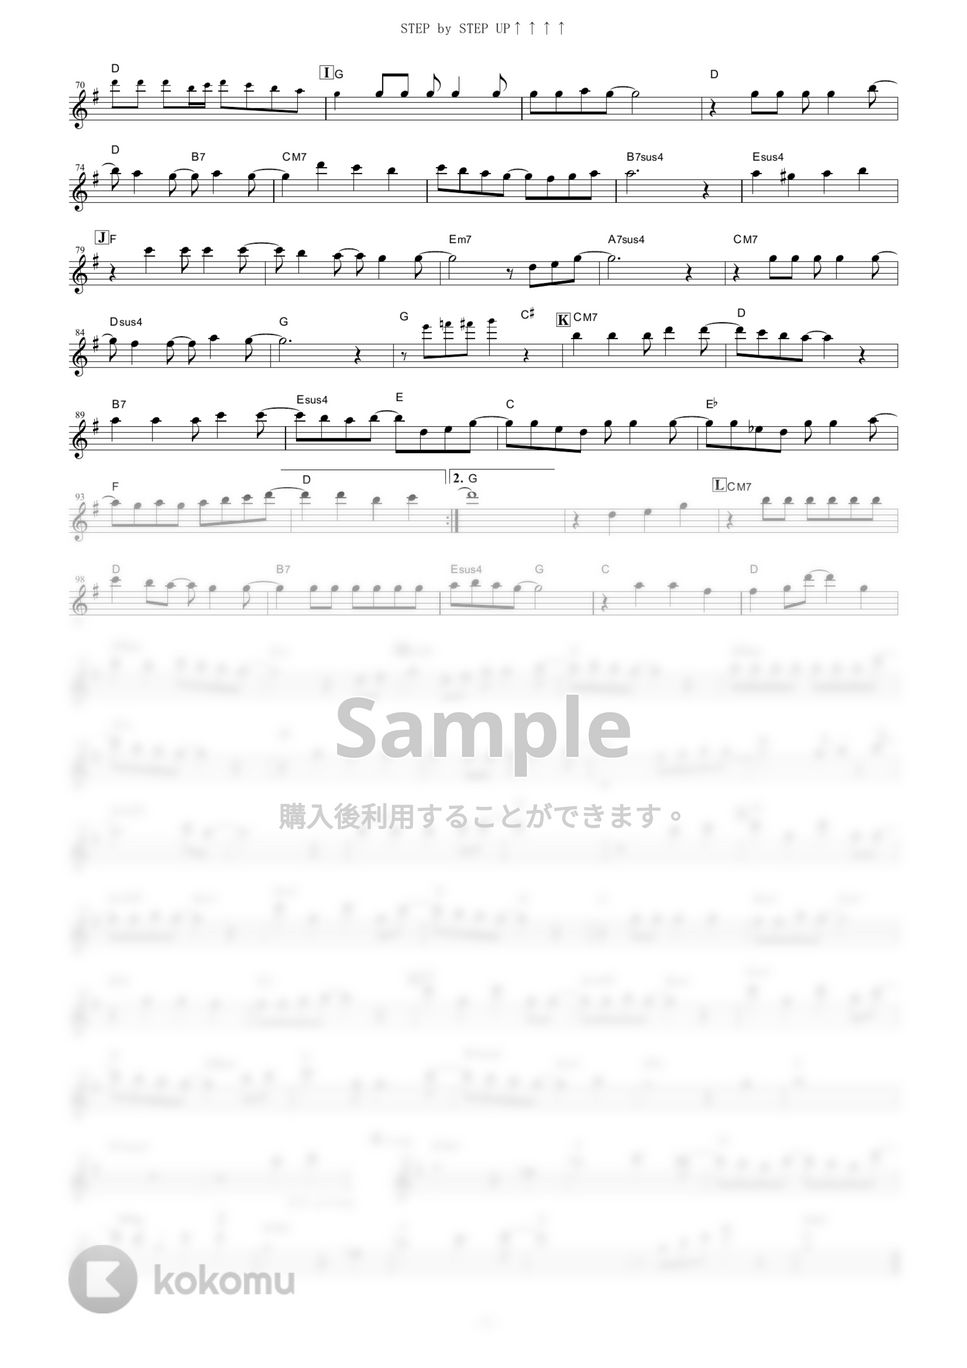 fourfolium - STEP by STEP UP↑↑↑↑ (『NEW GAME!!』 / in Bb) by muta-sax